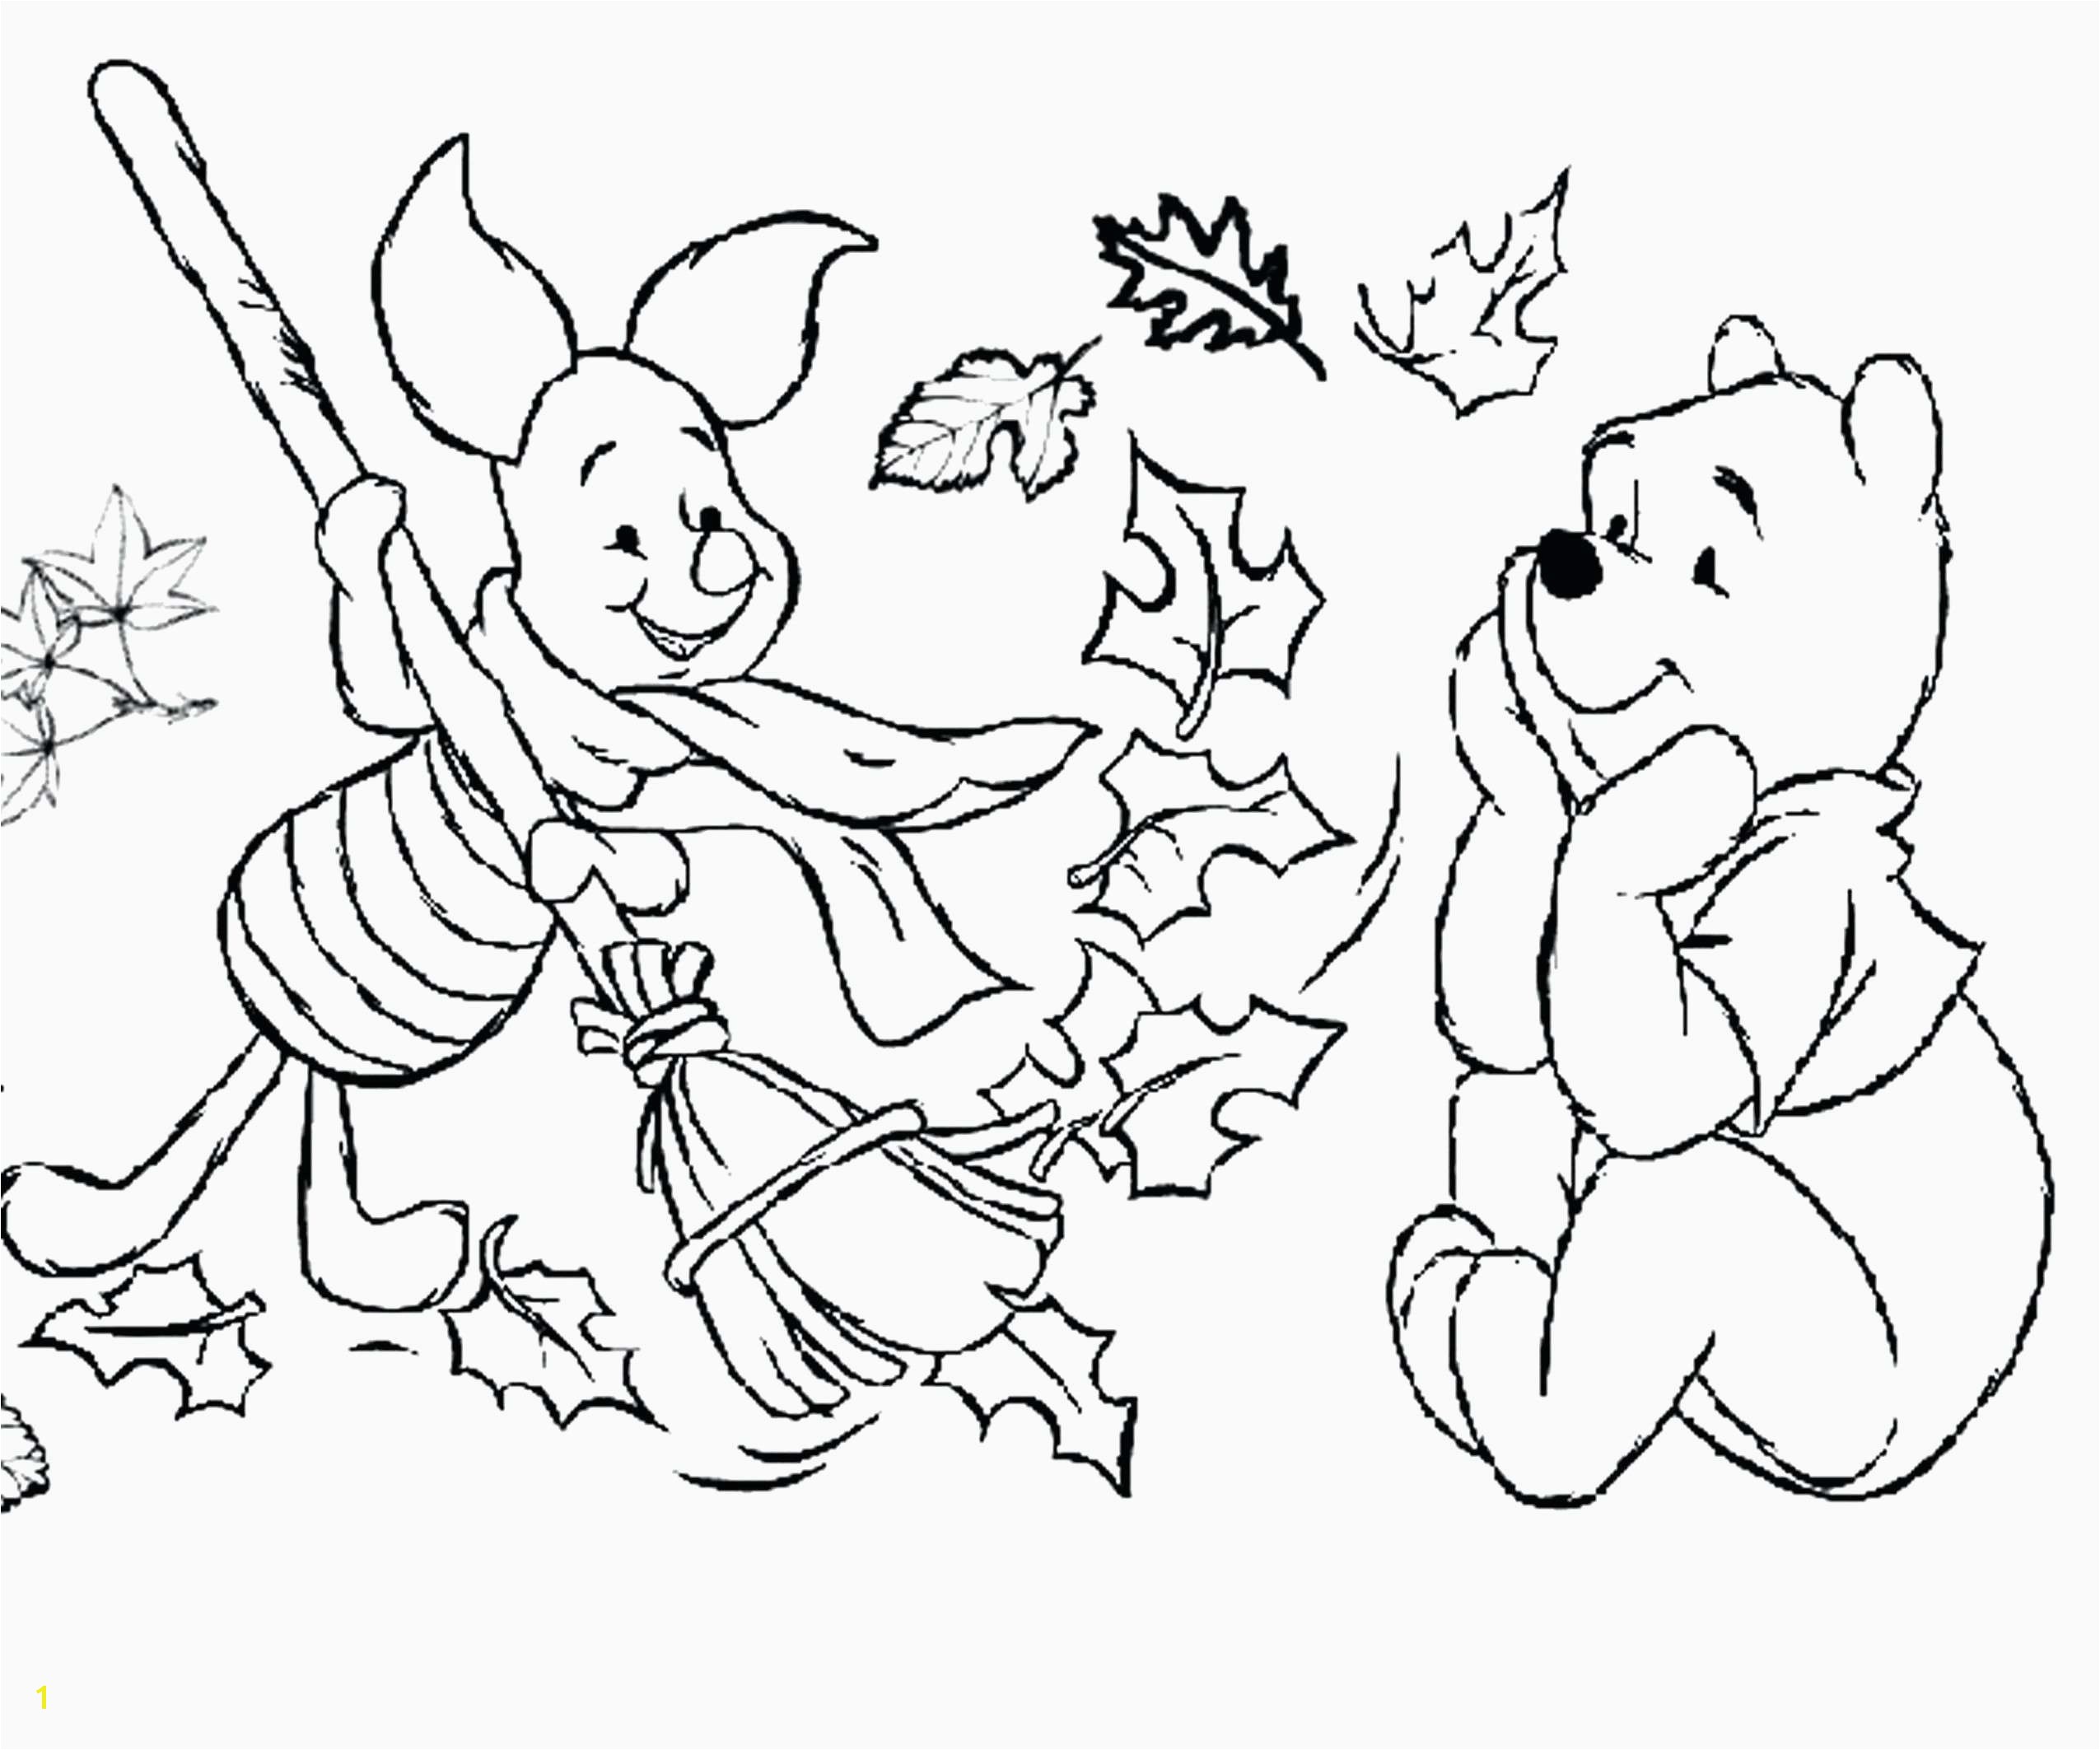 Cyndaquil Coloring Page Cyndaquil Coloring Page Princess and Frog Coloring Pages Printable